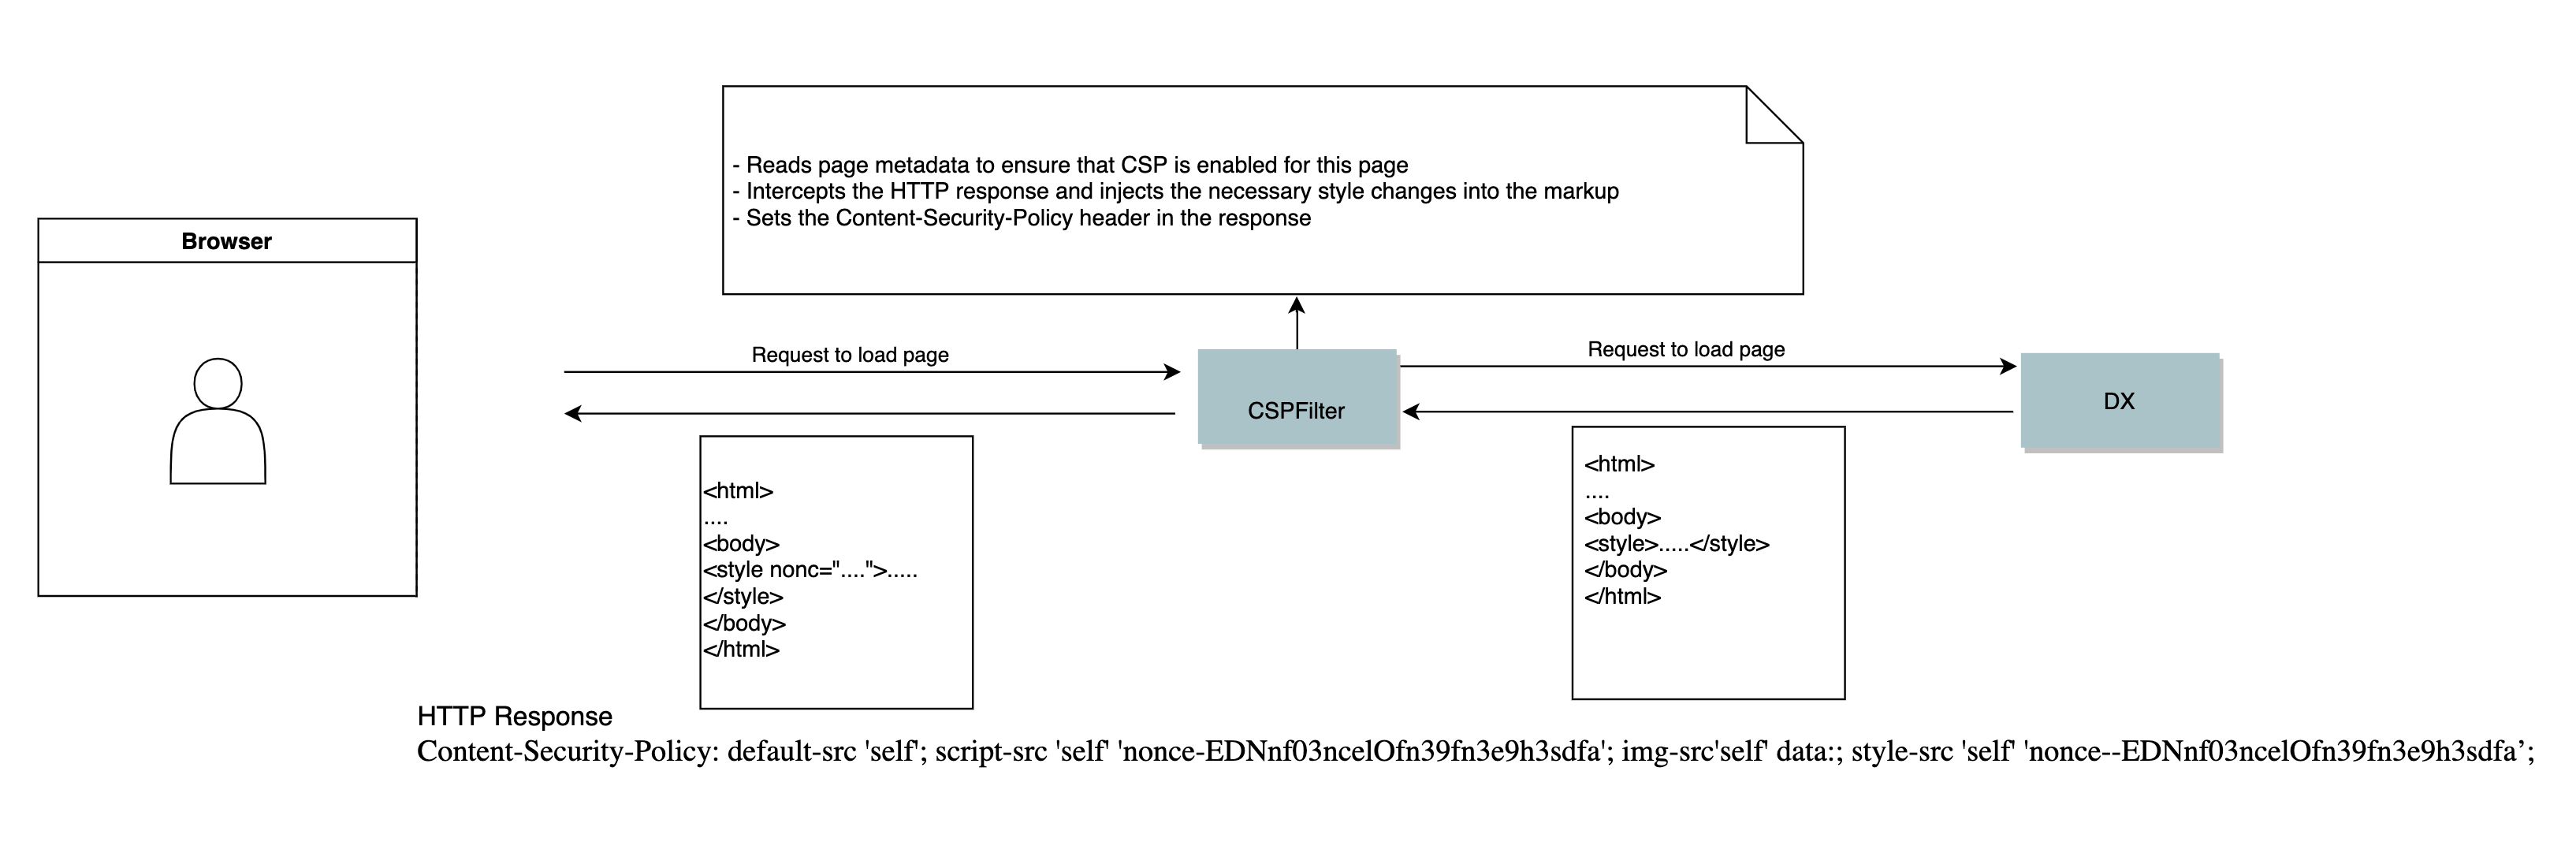 Content Security Policy Implementation flow